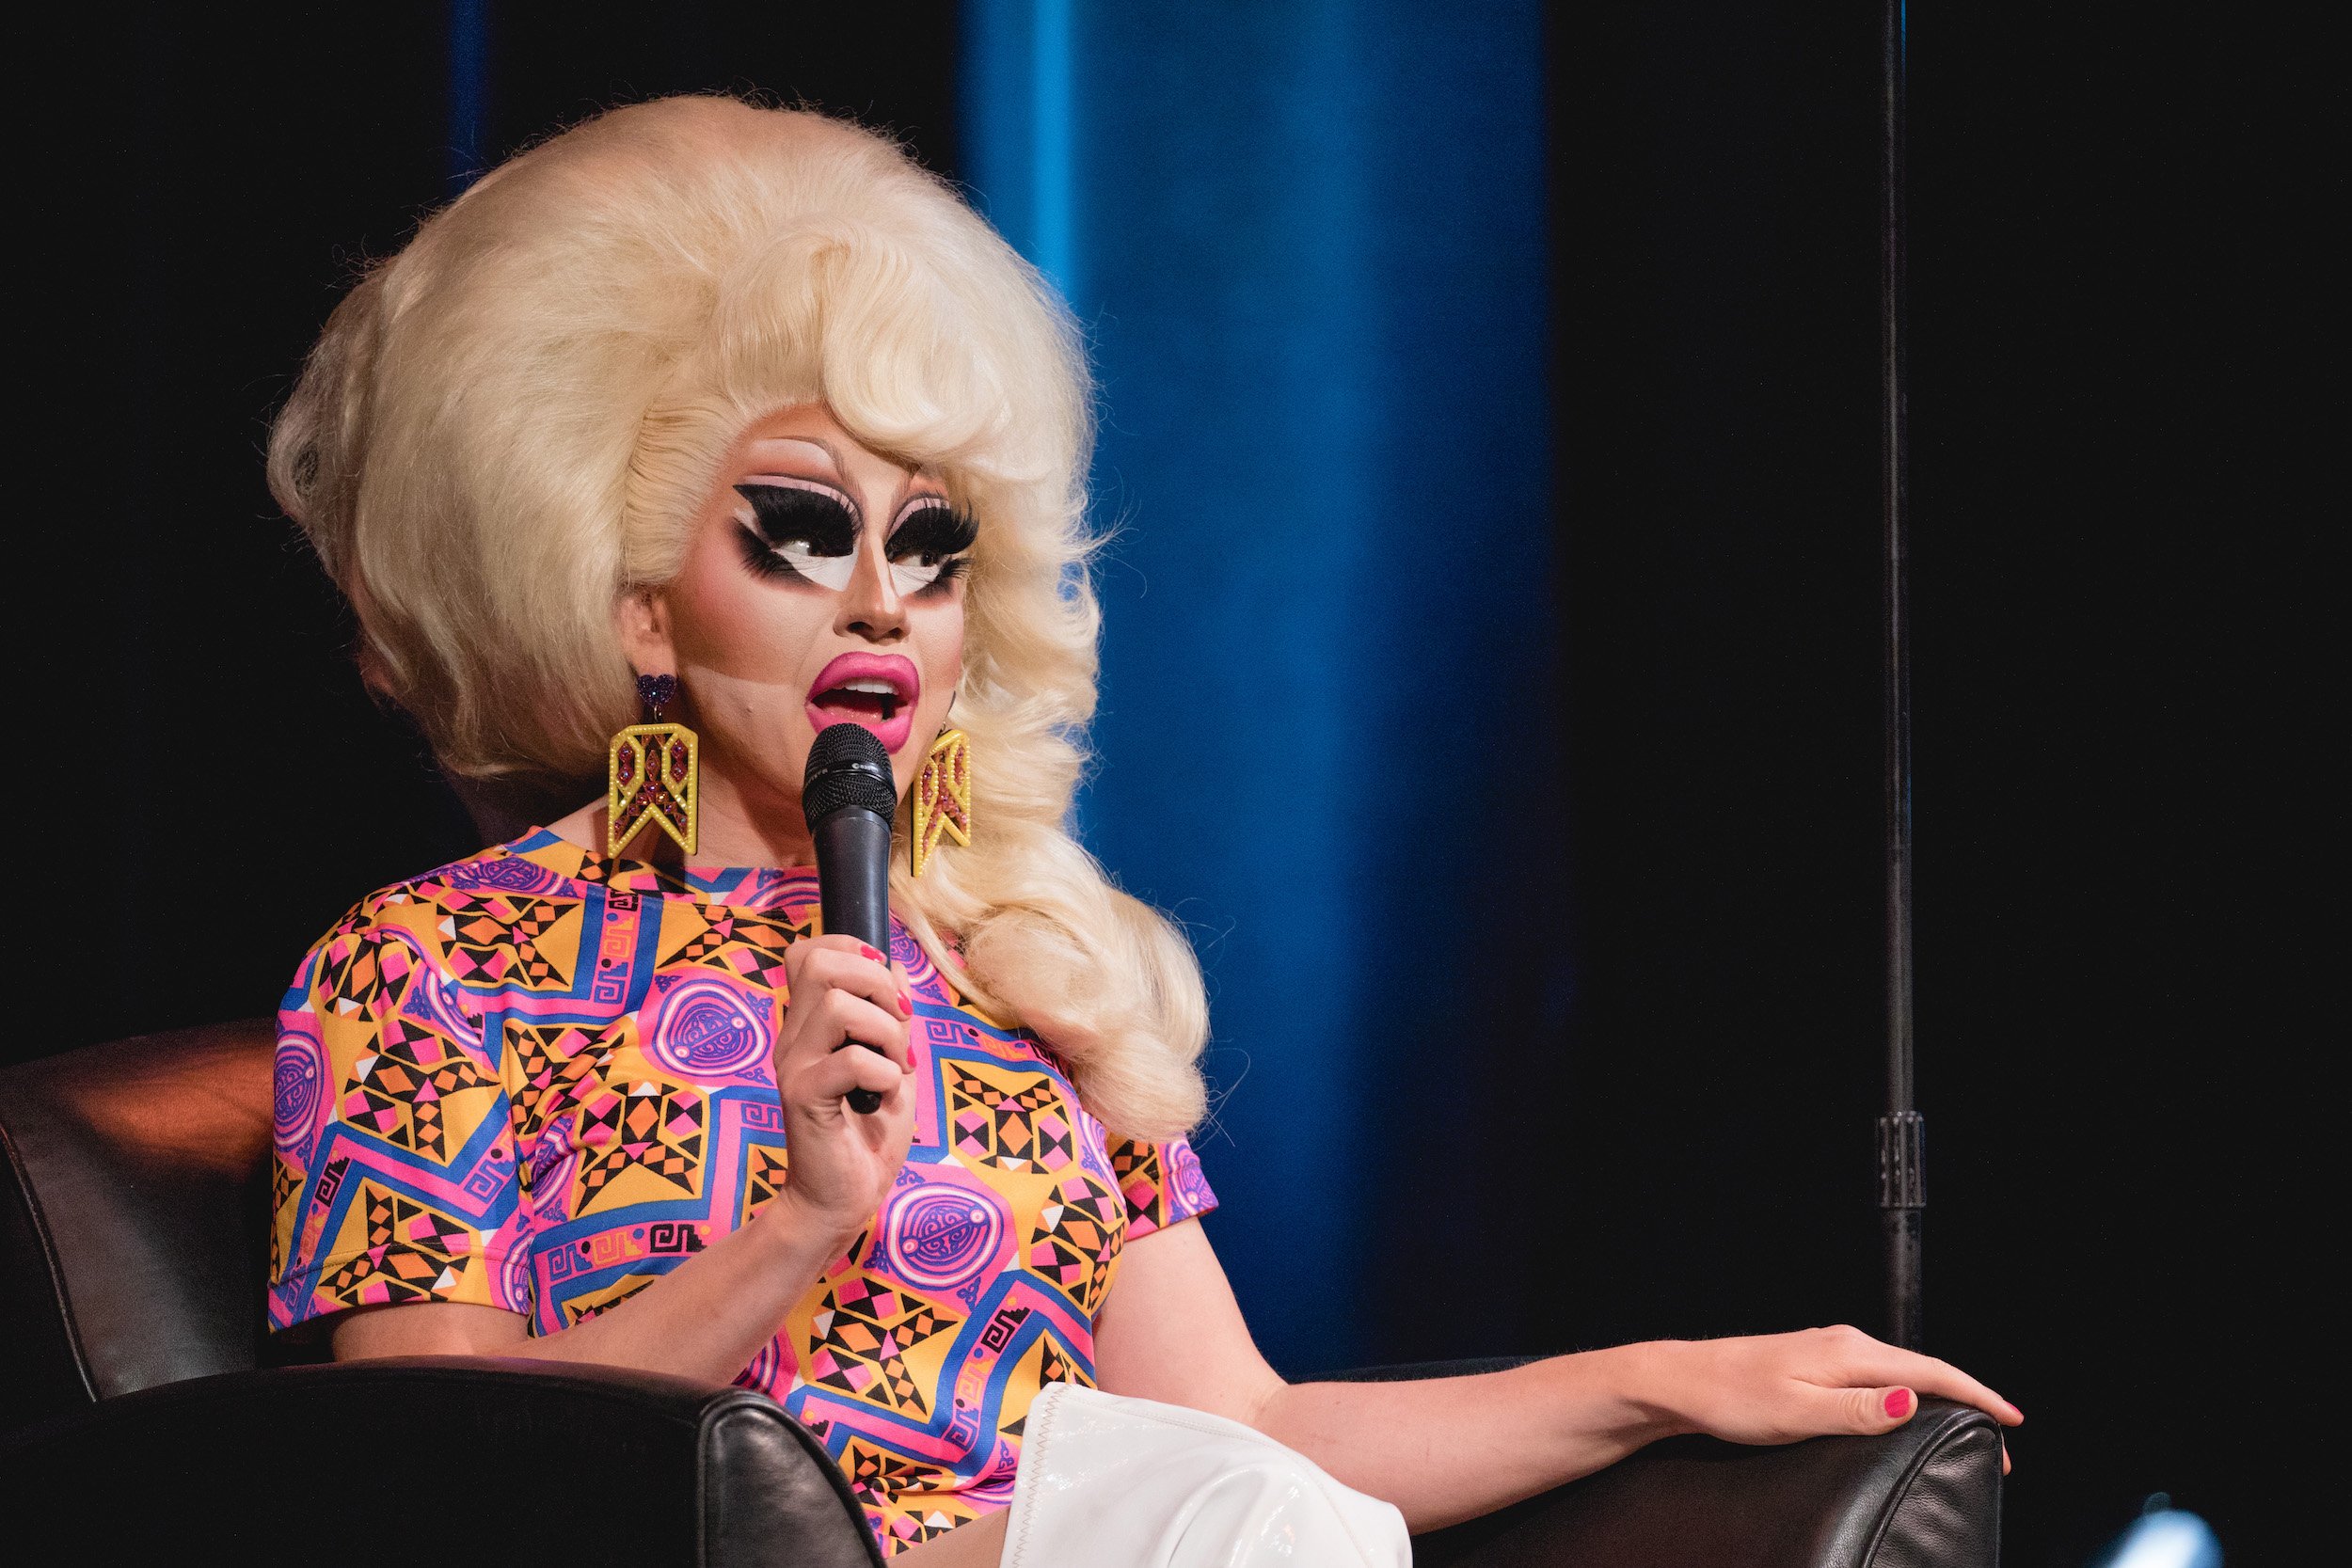 Trixie Mattel records an episode of 'The Bald and the Beautiful with Trixie Mattel and Katya Zamo' during Moontower Just For Laughs